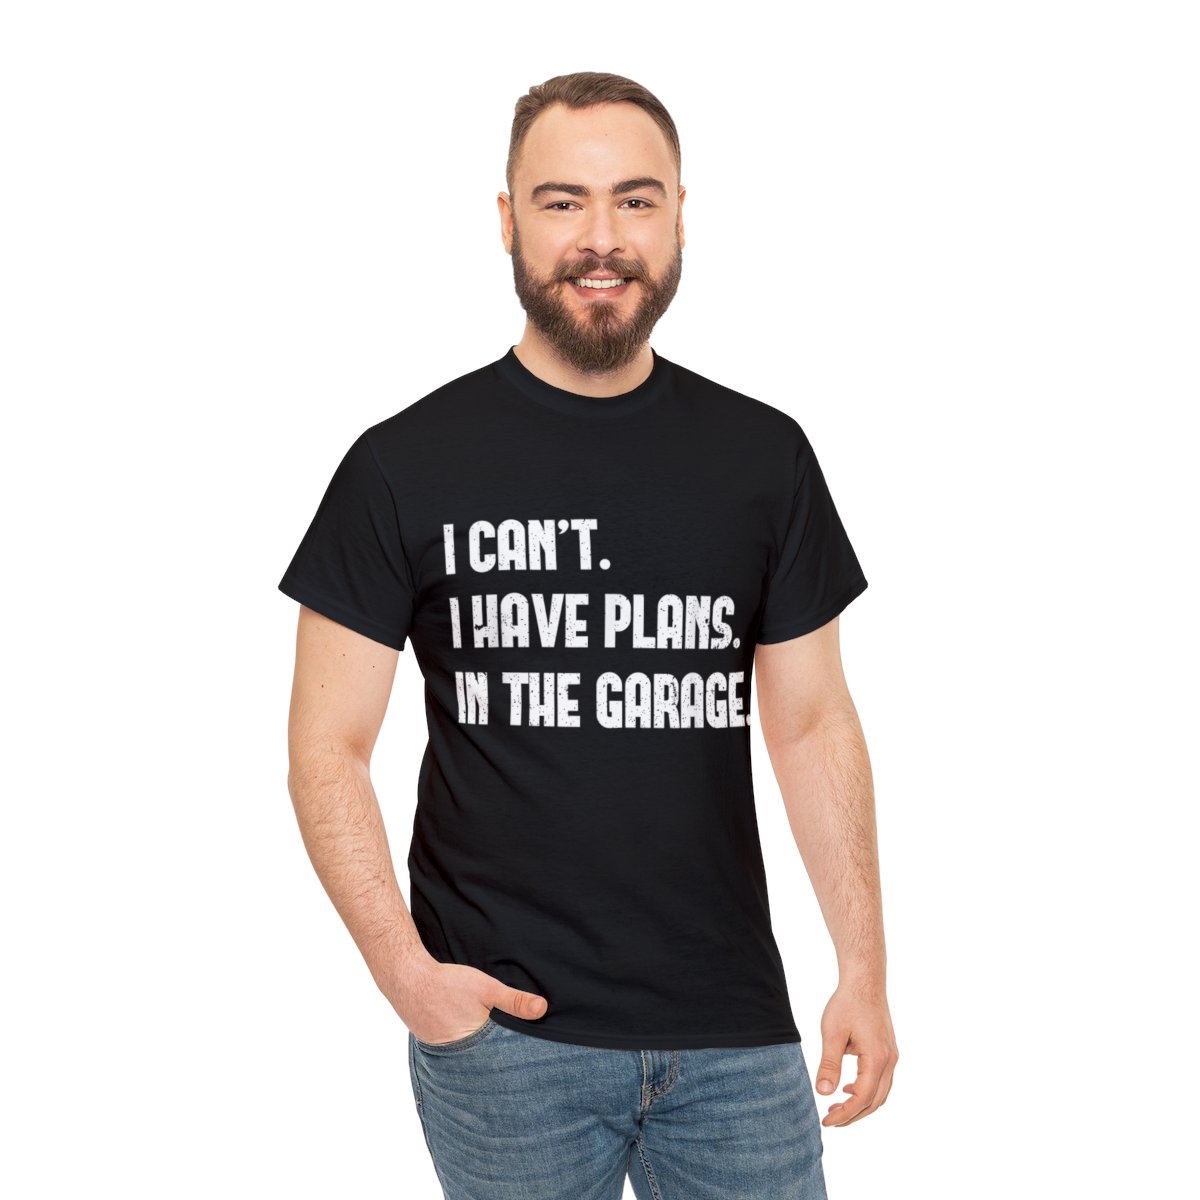 Car Mechanic Design Print,I Cant I Have Plans In The Garage T-Shirt